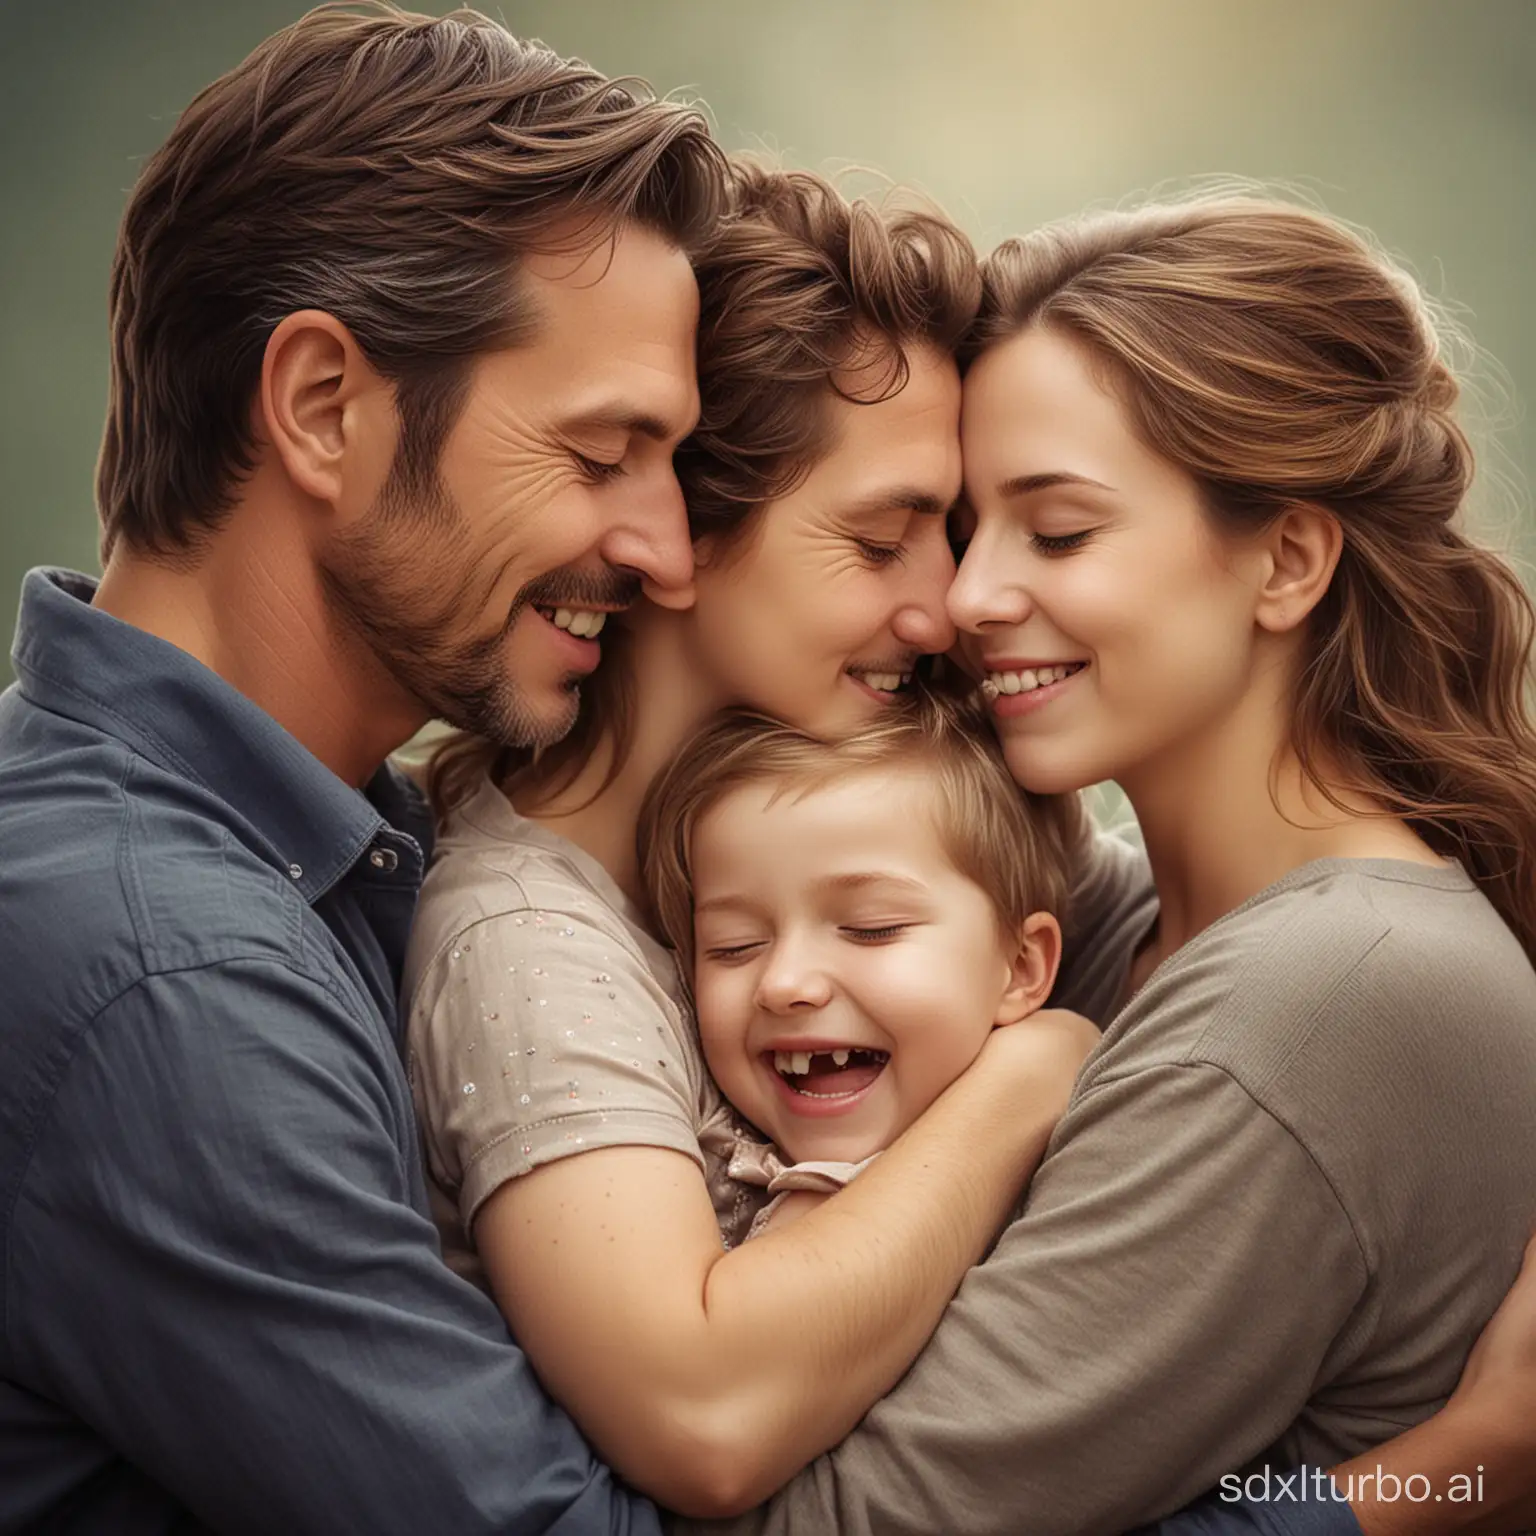 Affectionate-Family-Embracing-with-Love